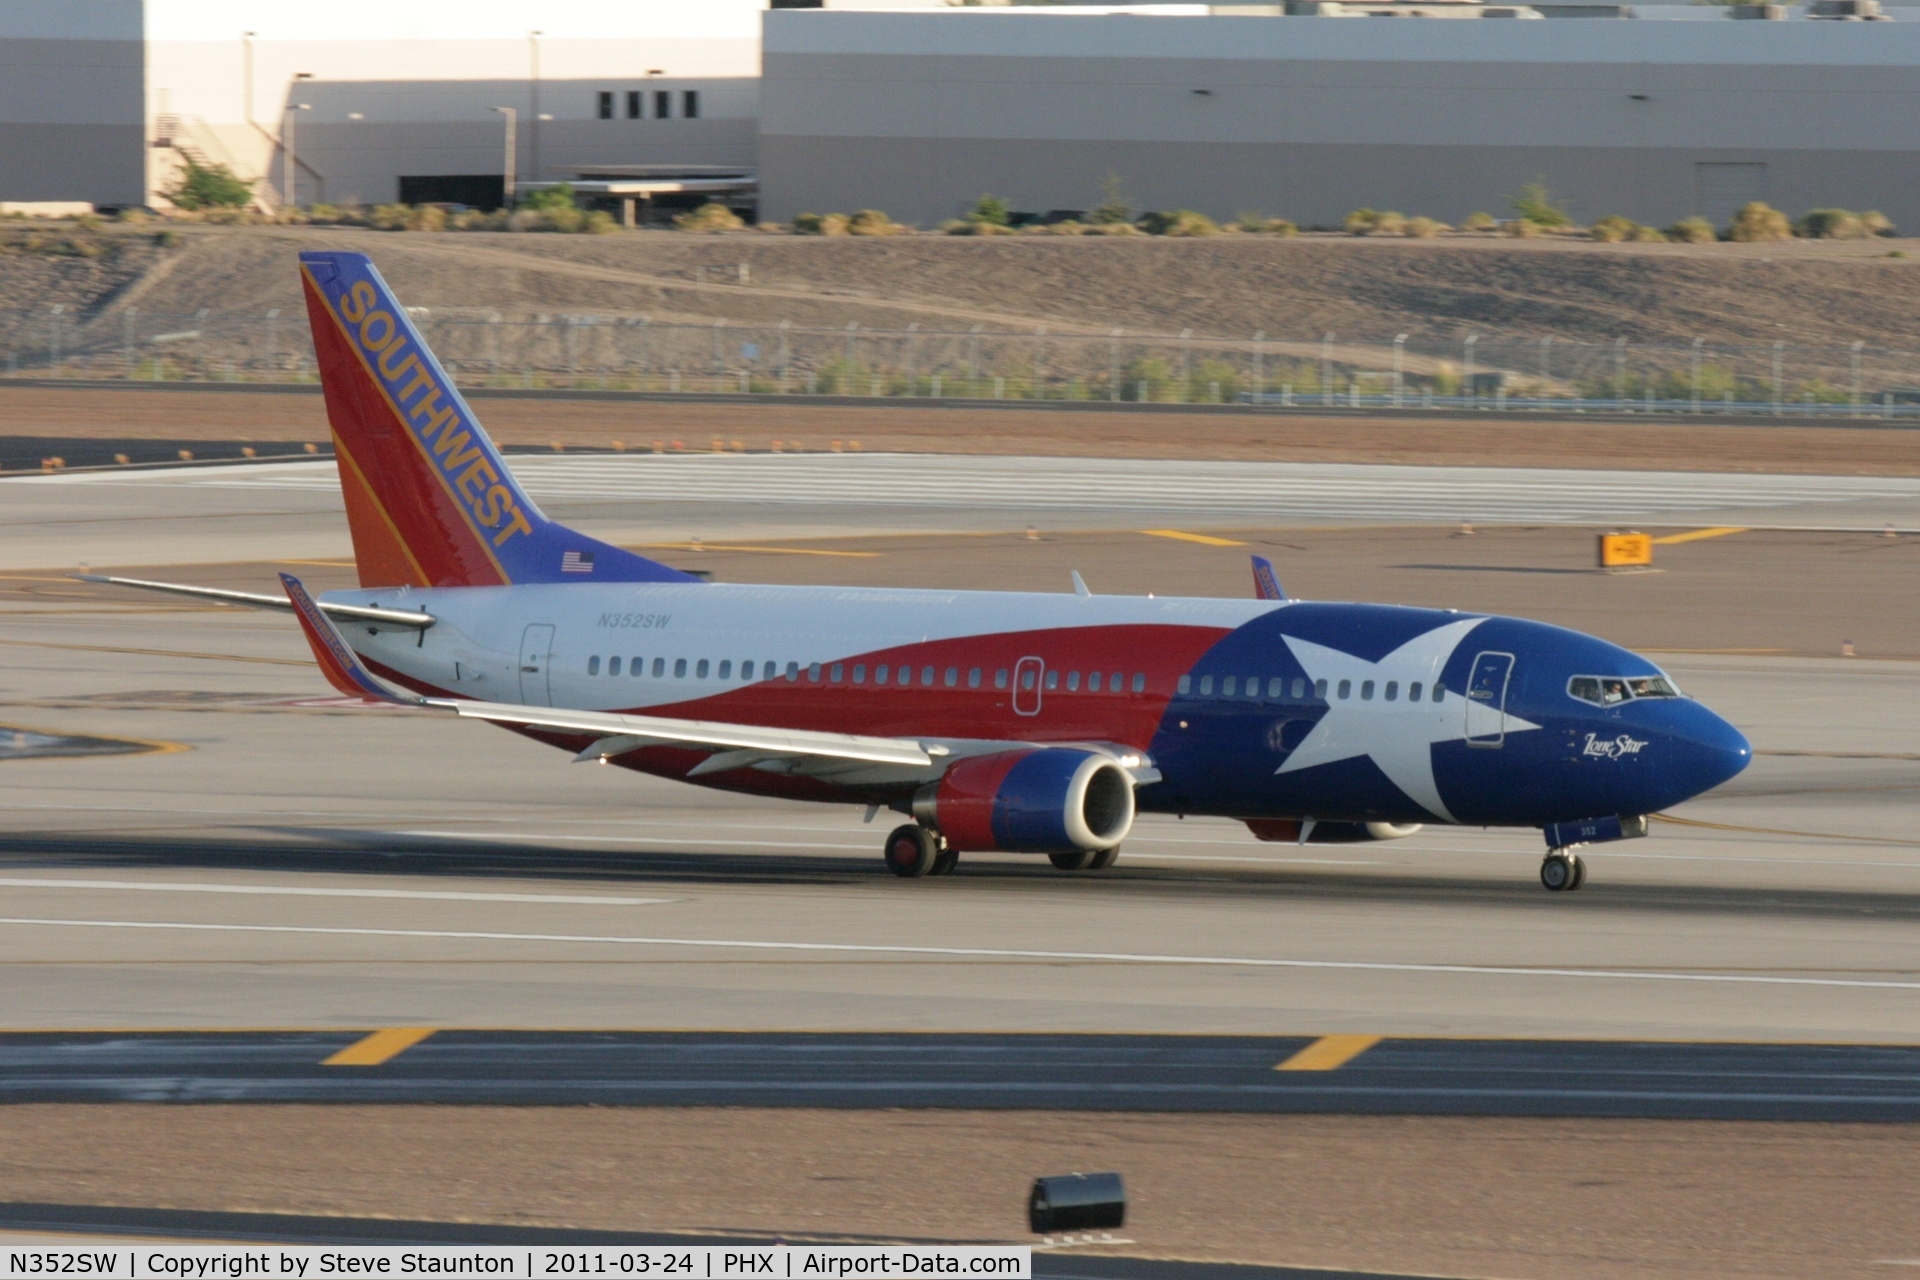 N352SW, 1990 Boeing 737-3H4 C/N 24888, Taken at Phoenix Sky Harbor Airport, in March 2011 whilst on an Aeroprint Aviation tour